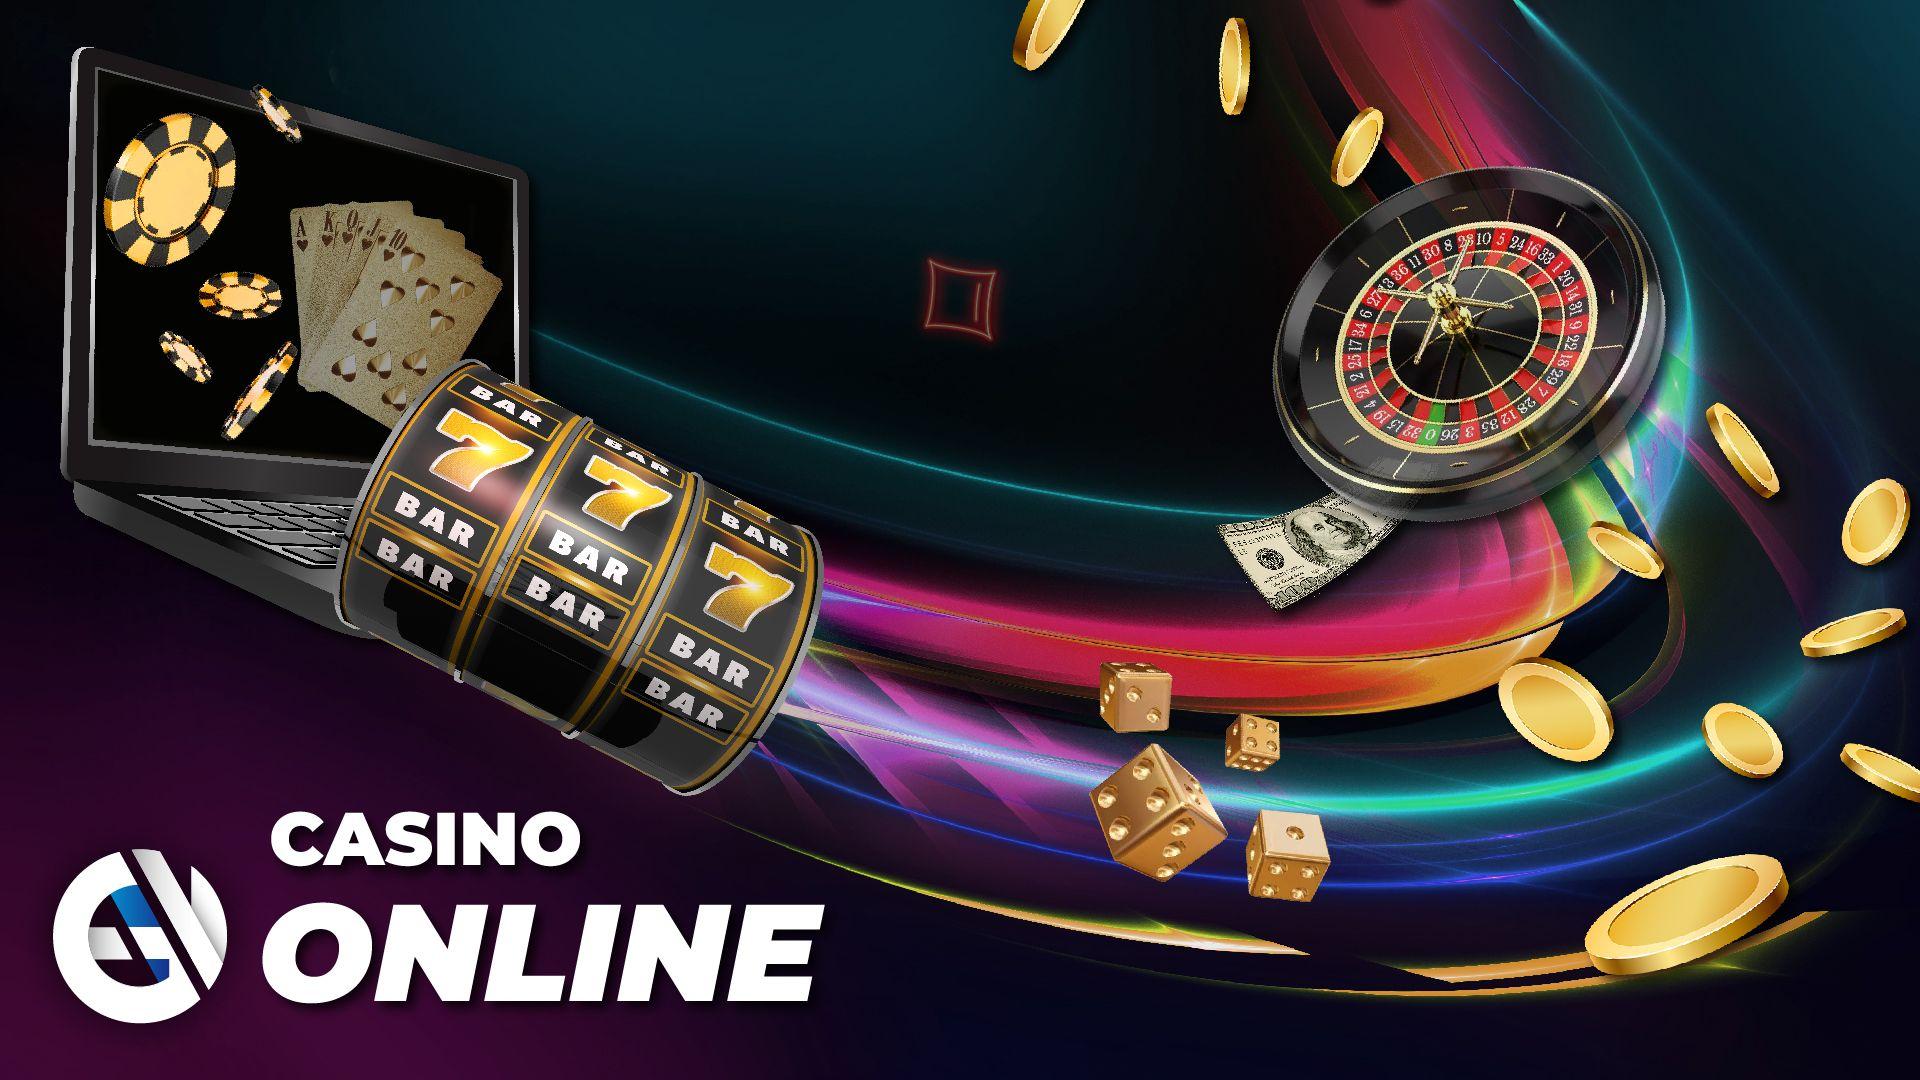 Slots like Dragon Hatch 2 change the casino games industry